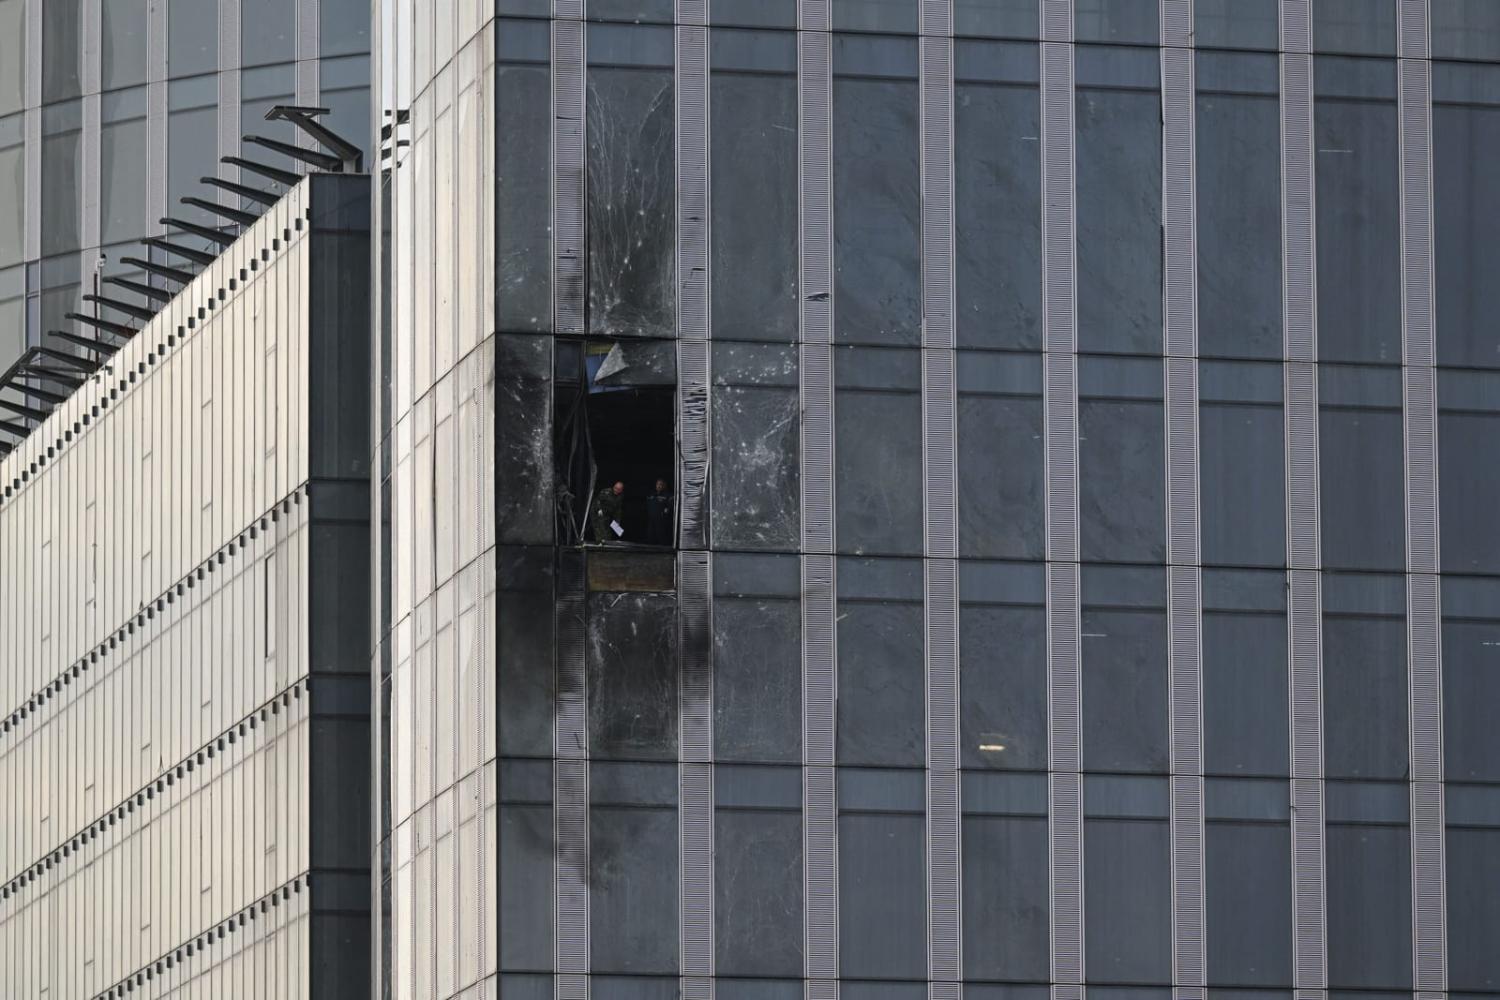 Damage to a building in the Moscow International Business Centre following a drone attack on 23 August (Natalia Kolesnikova/AFP via Getty Images)